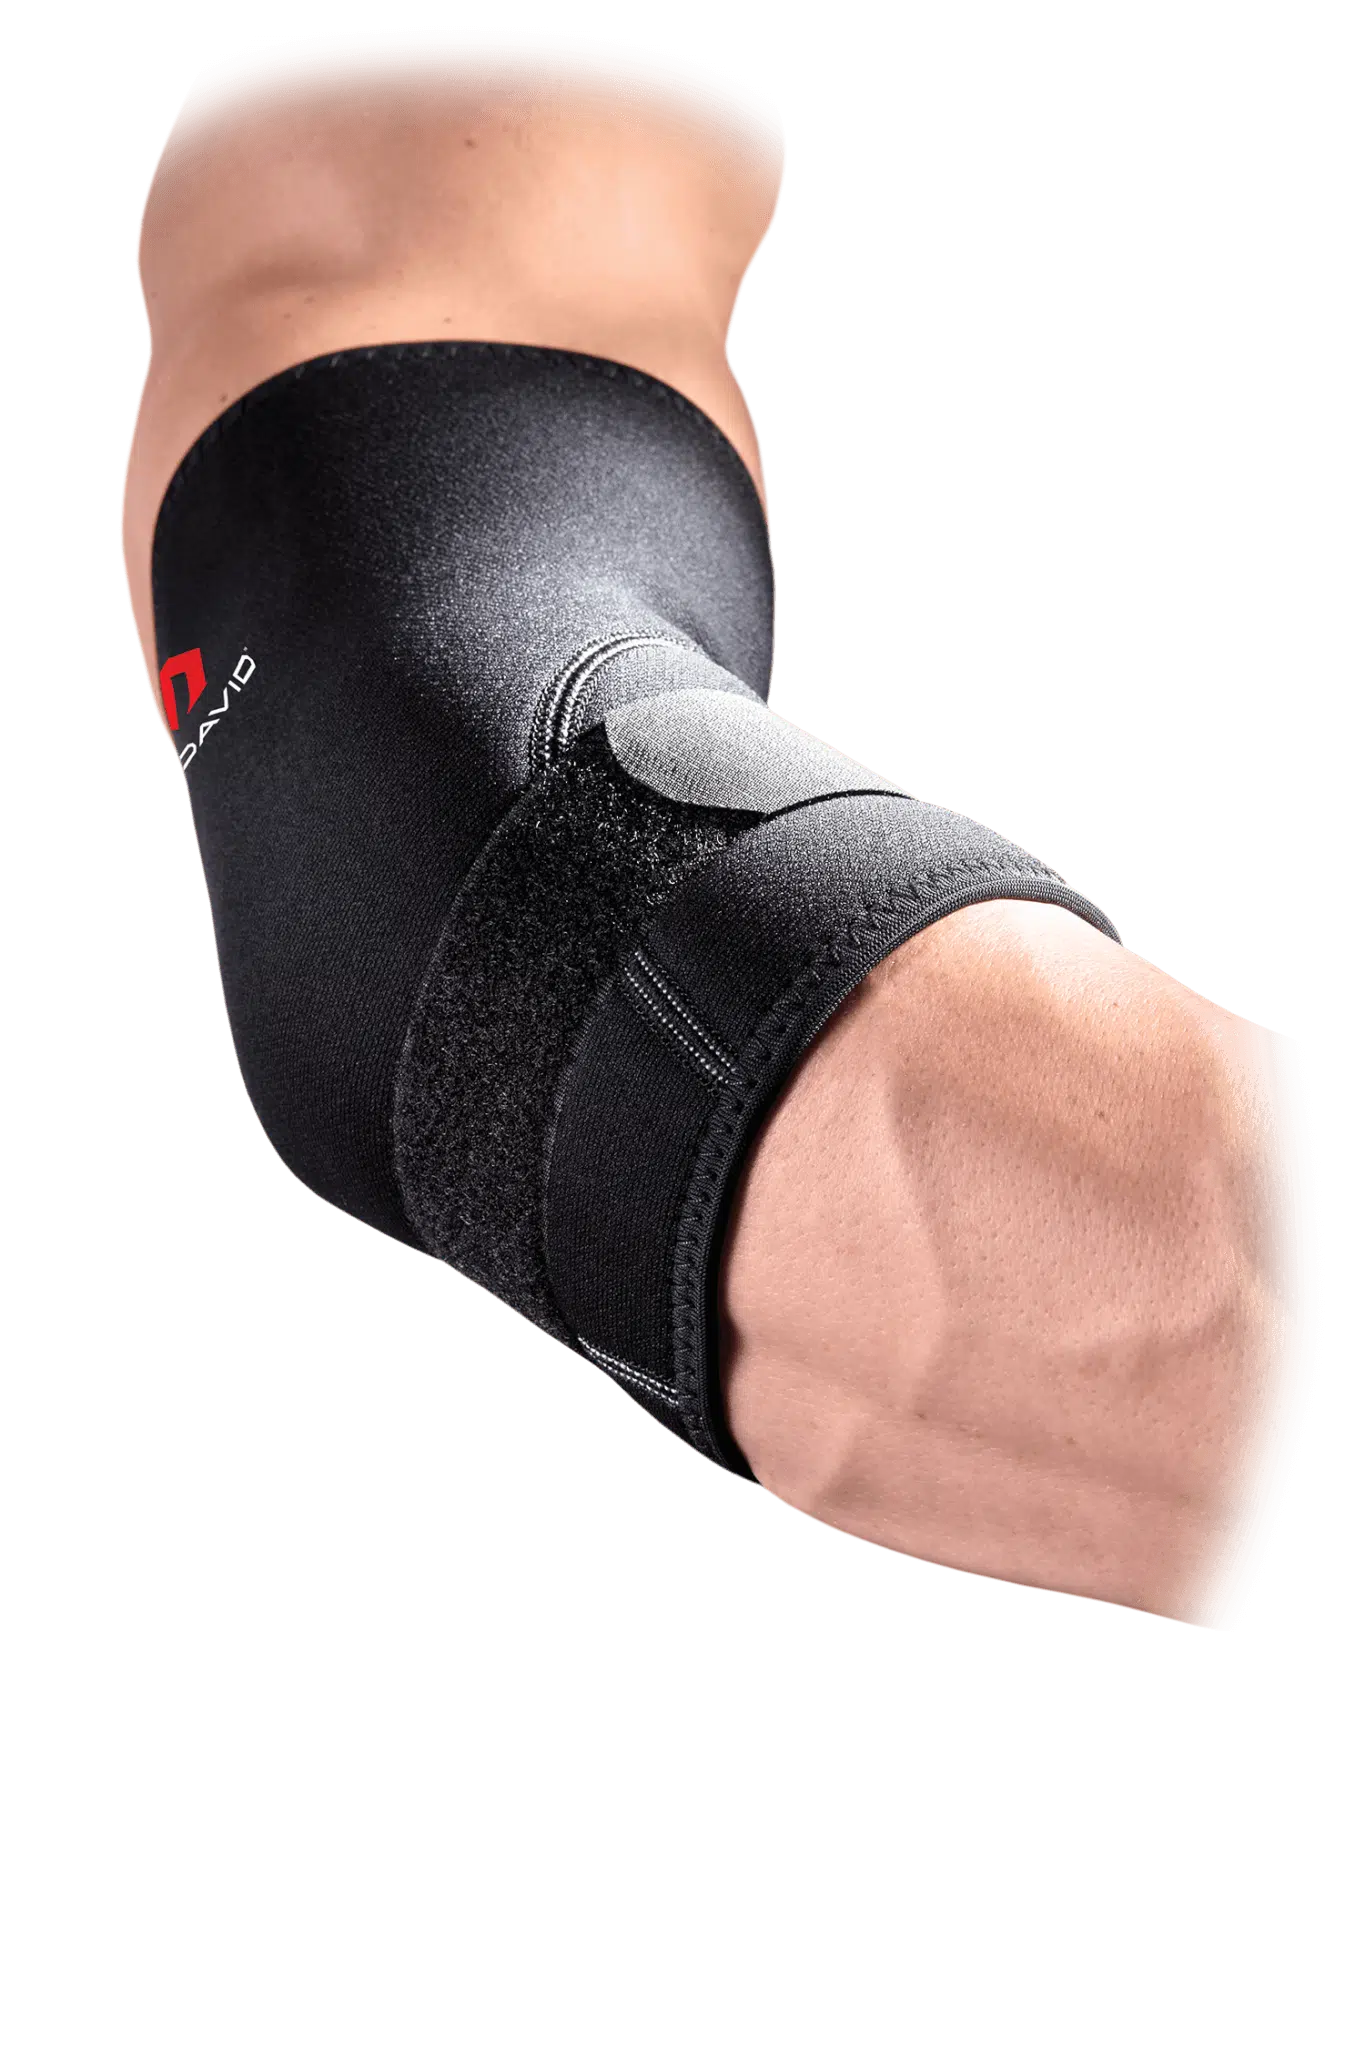 Trainers Choice Wrist Compression and Support Wrap assists with Sprains,  Strains, Tendonitis, Arthritis, Soft Tissue and Repetitive Strain Injuries